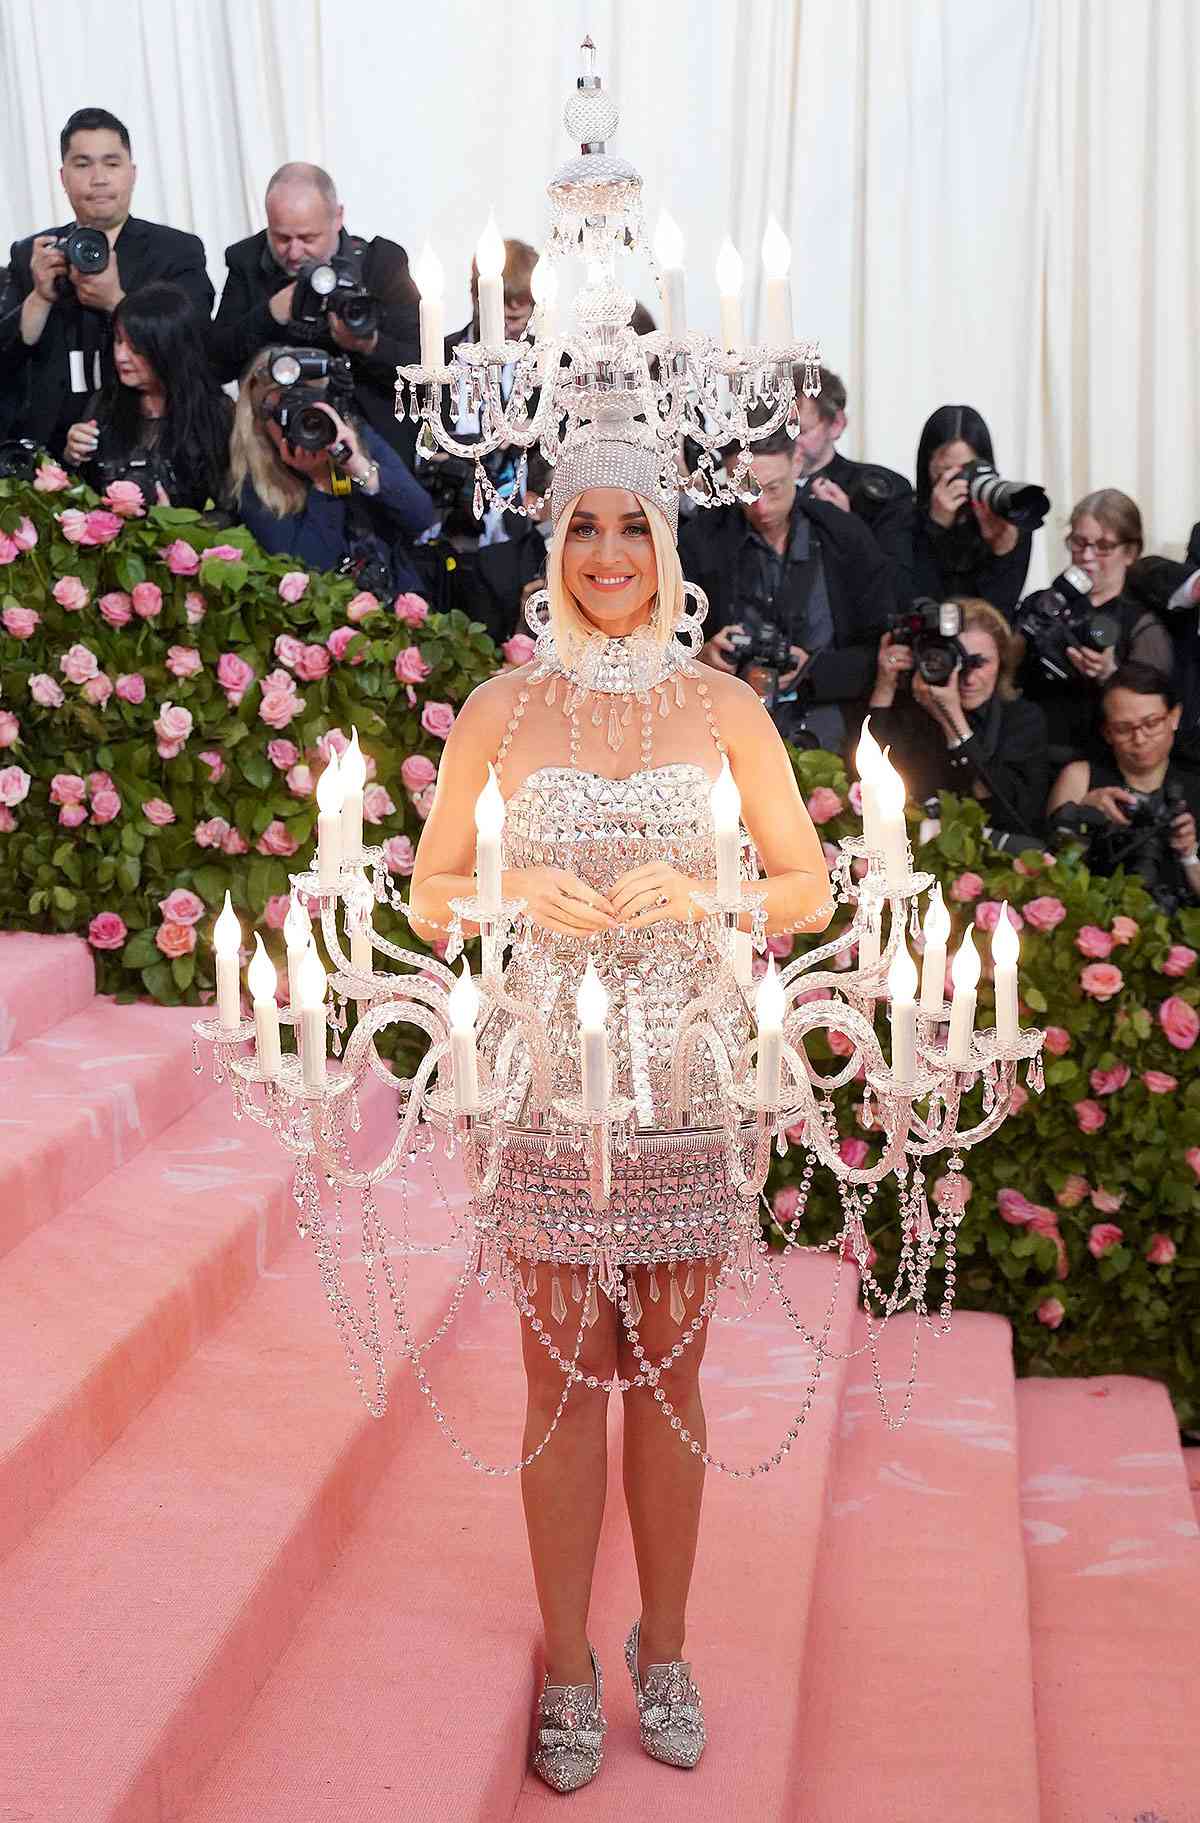 A Chandelier